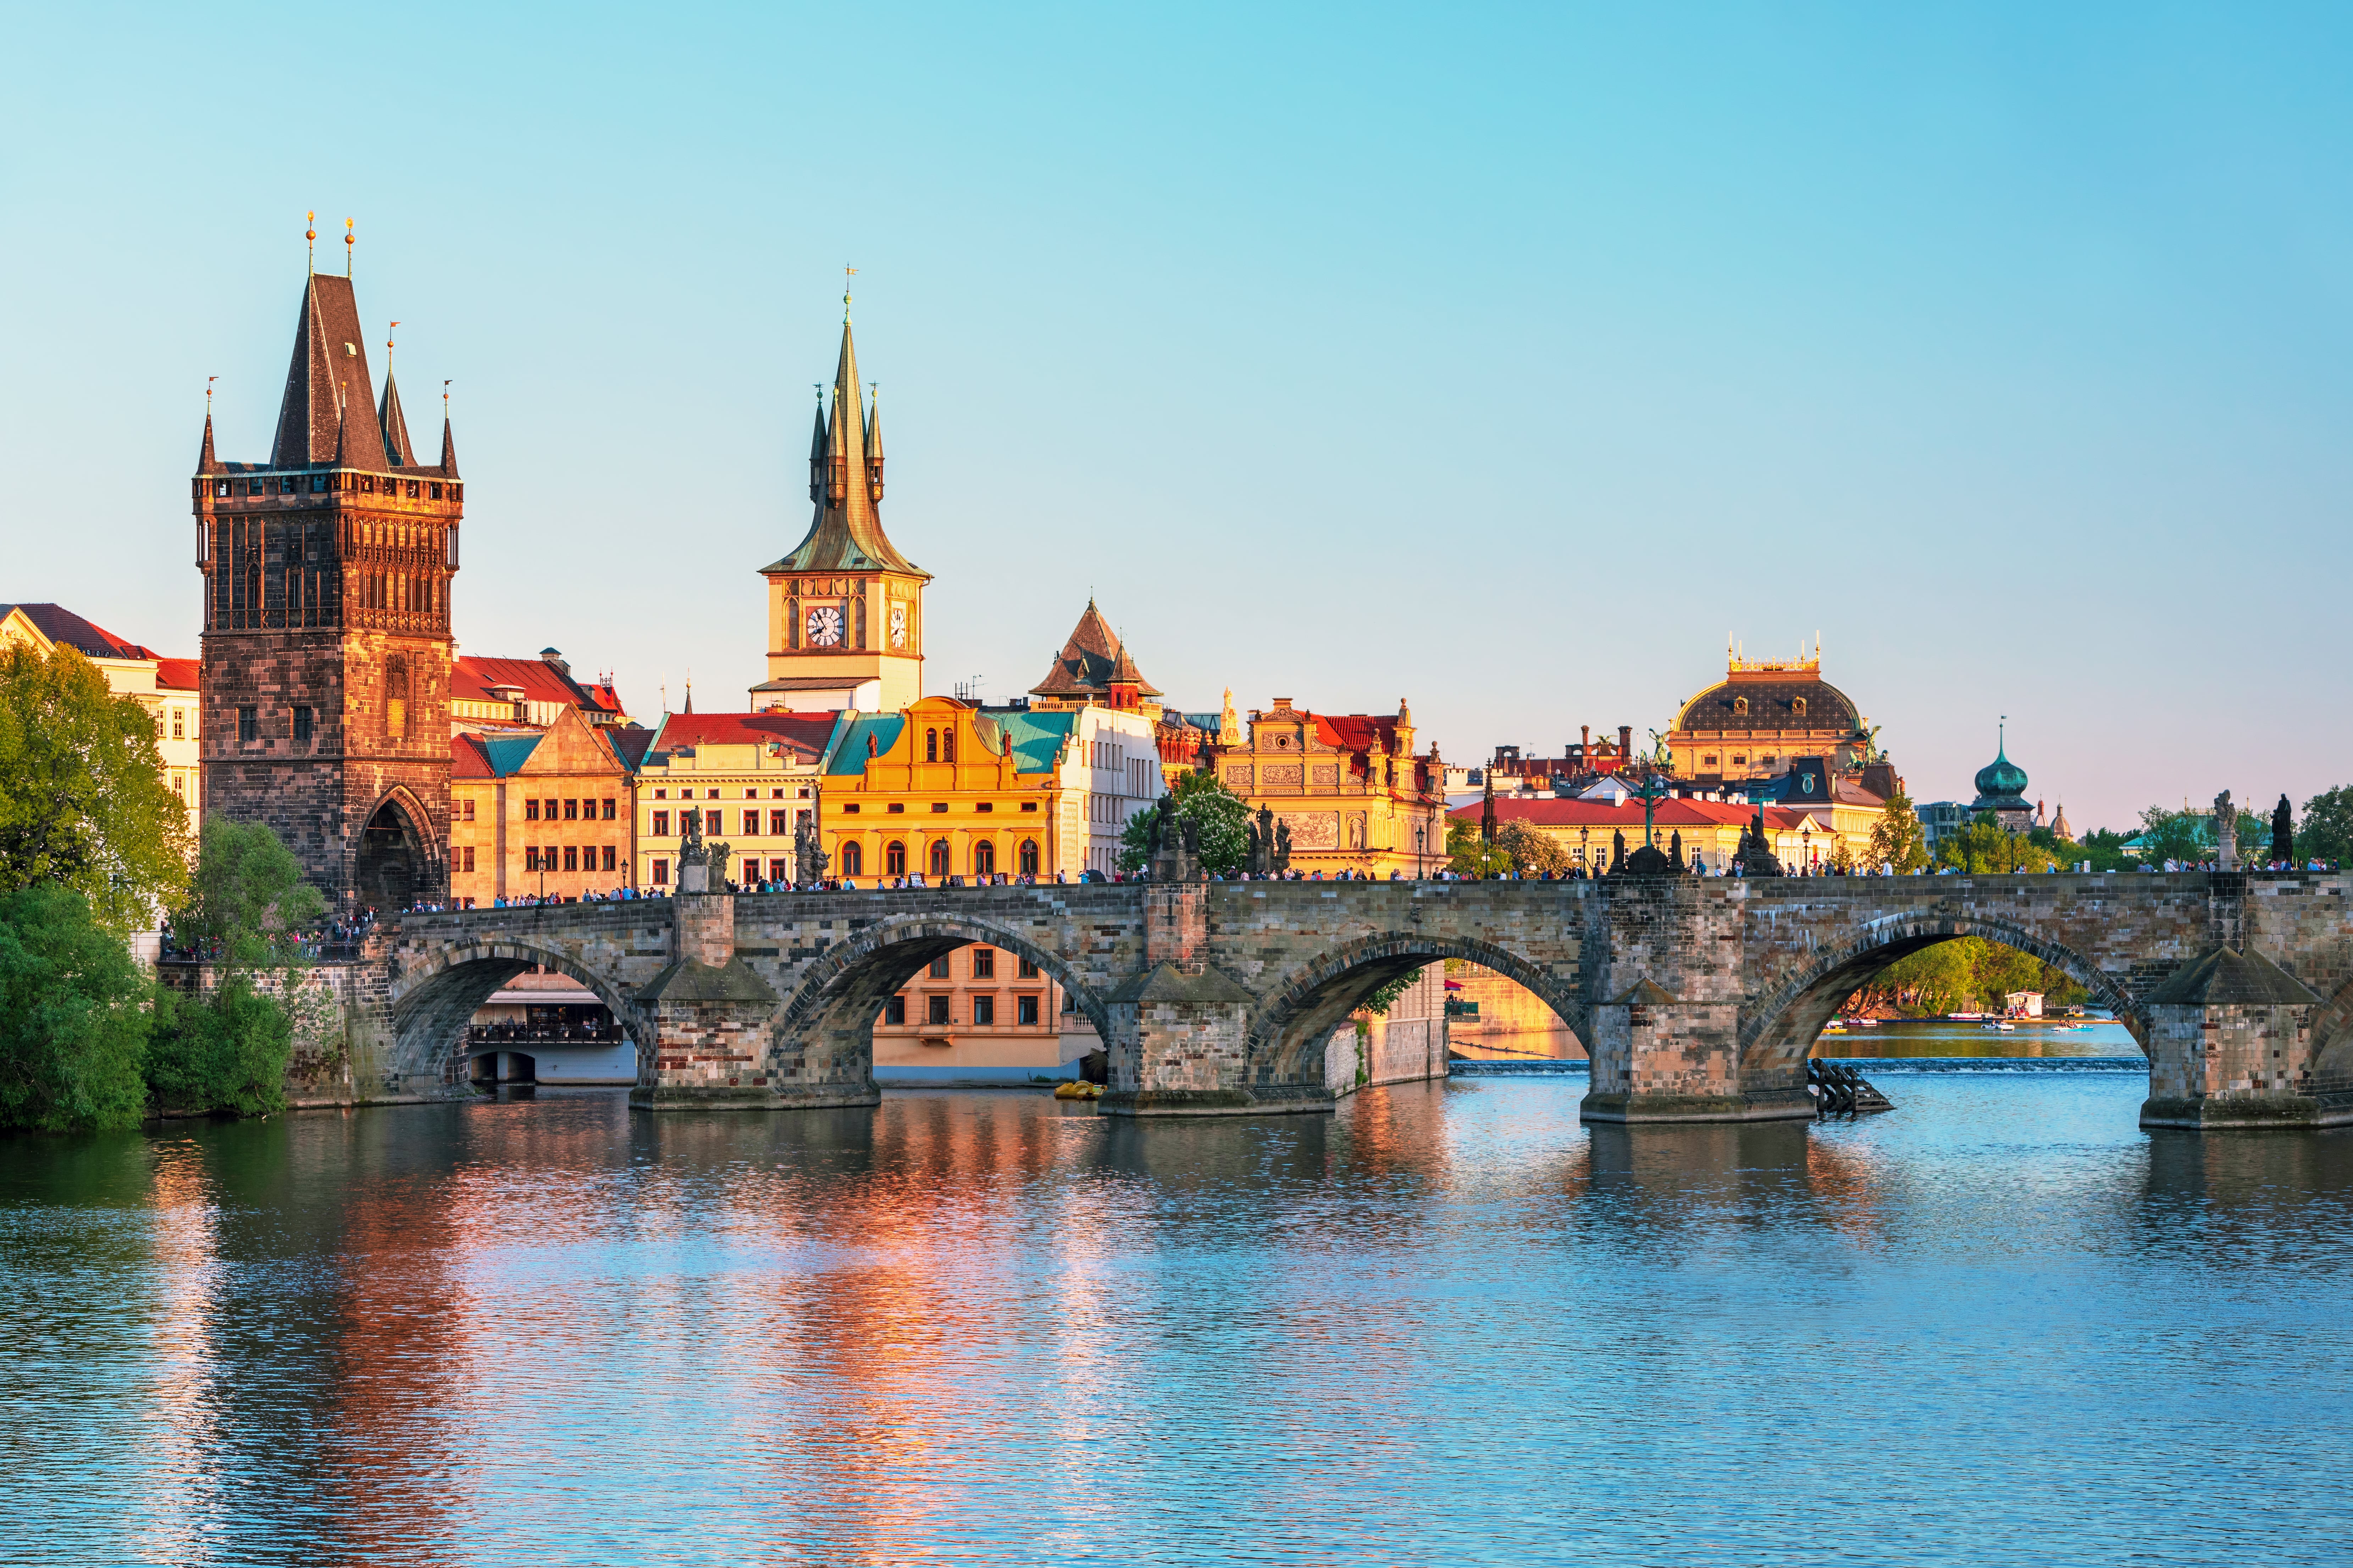 Picture of the Charles Bridge over the river Vltava in Prague at Sunset